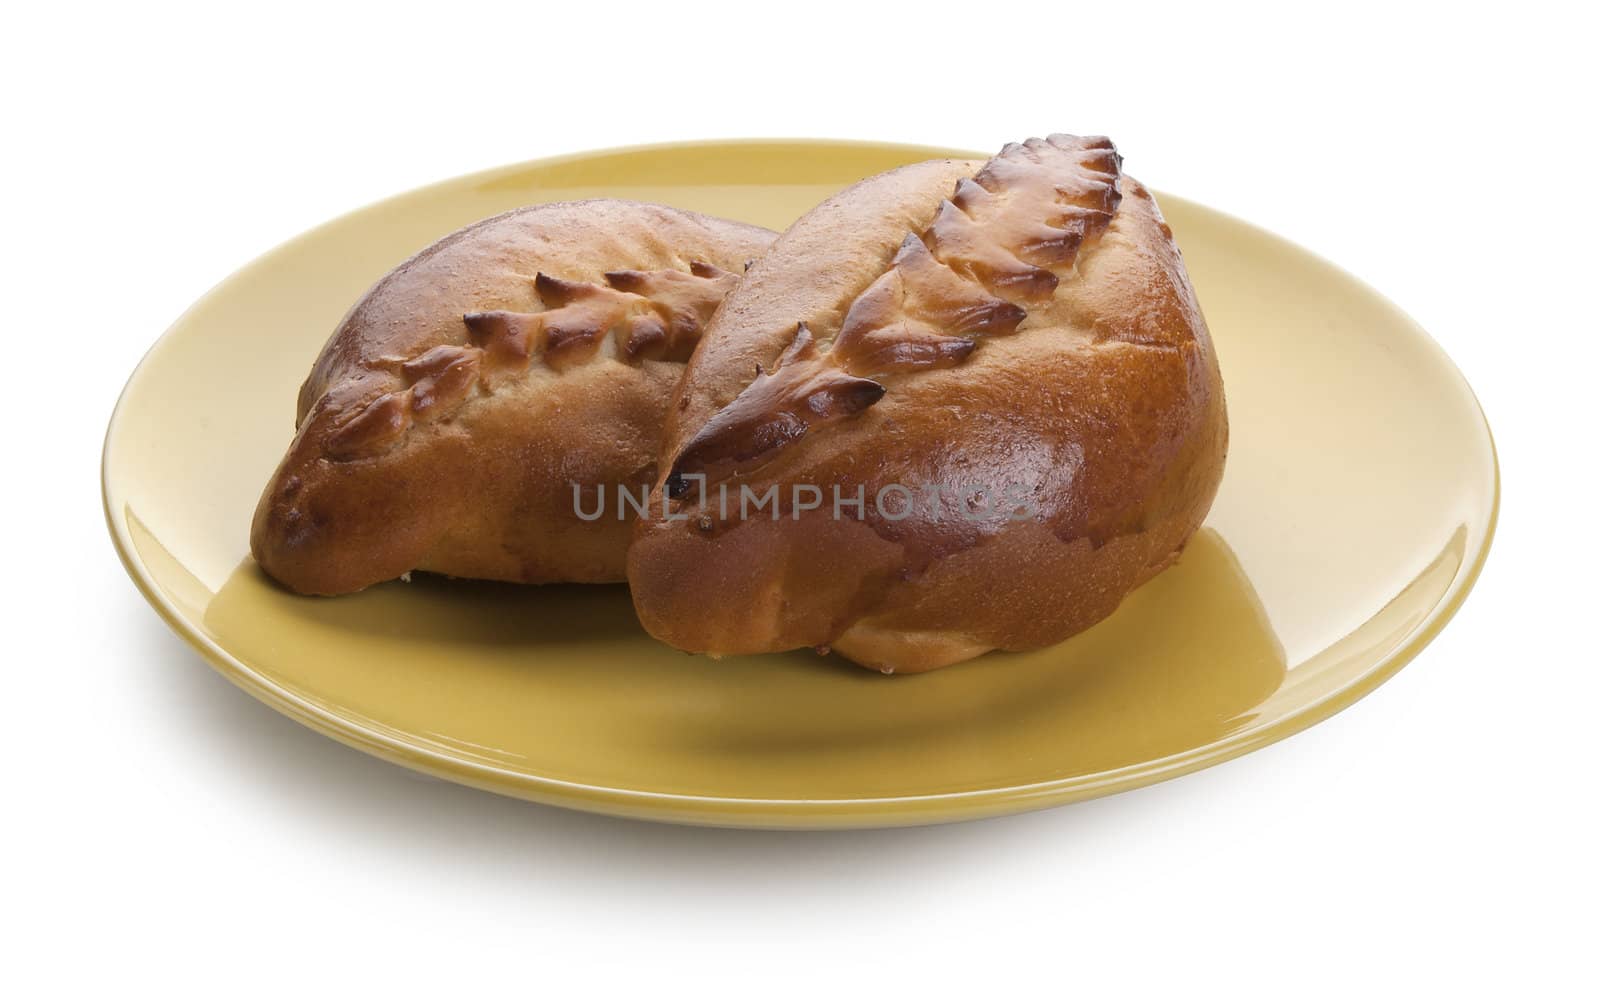 Two baked pasty on the yellow plate